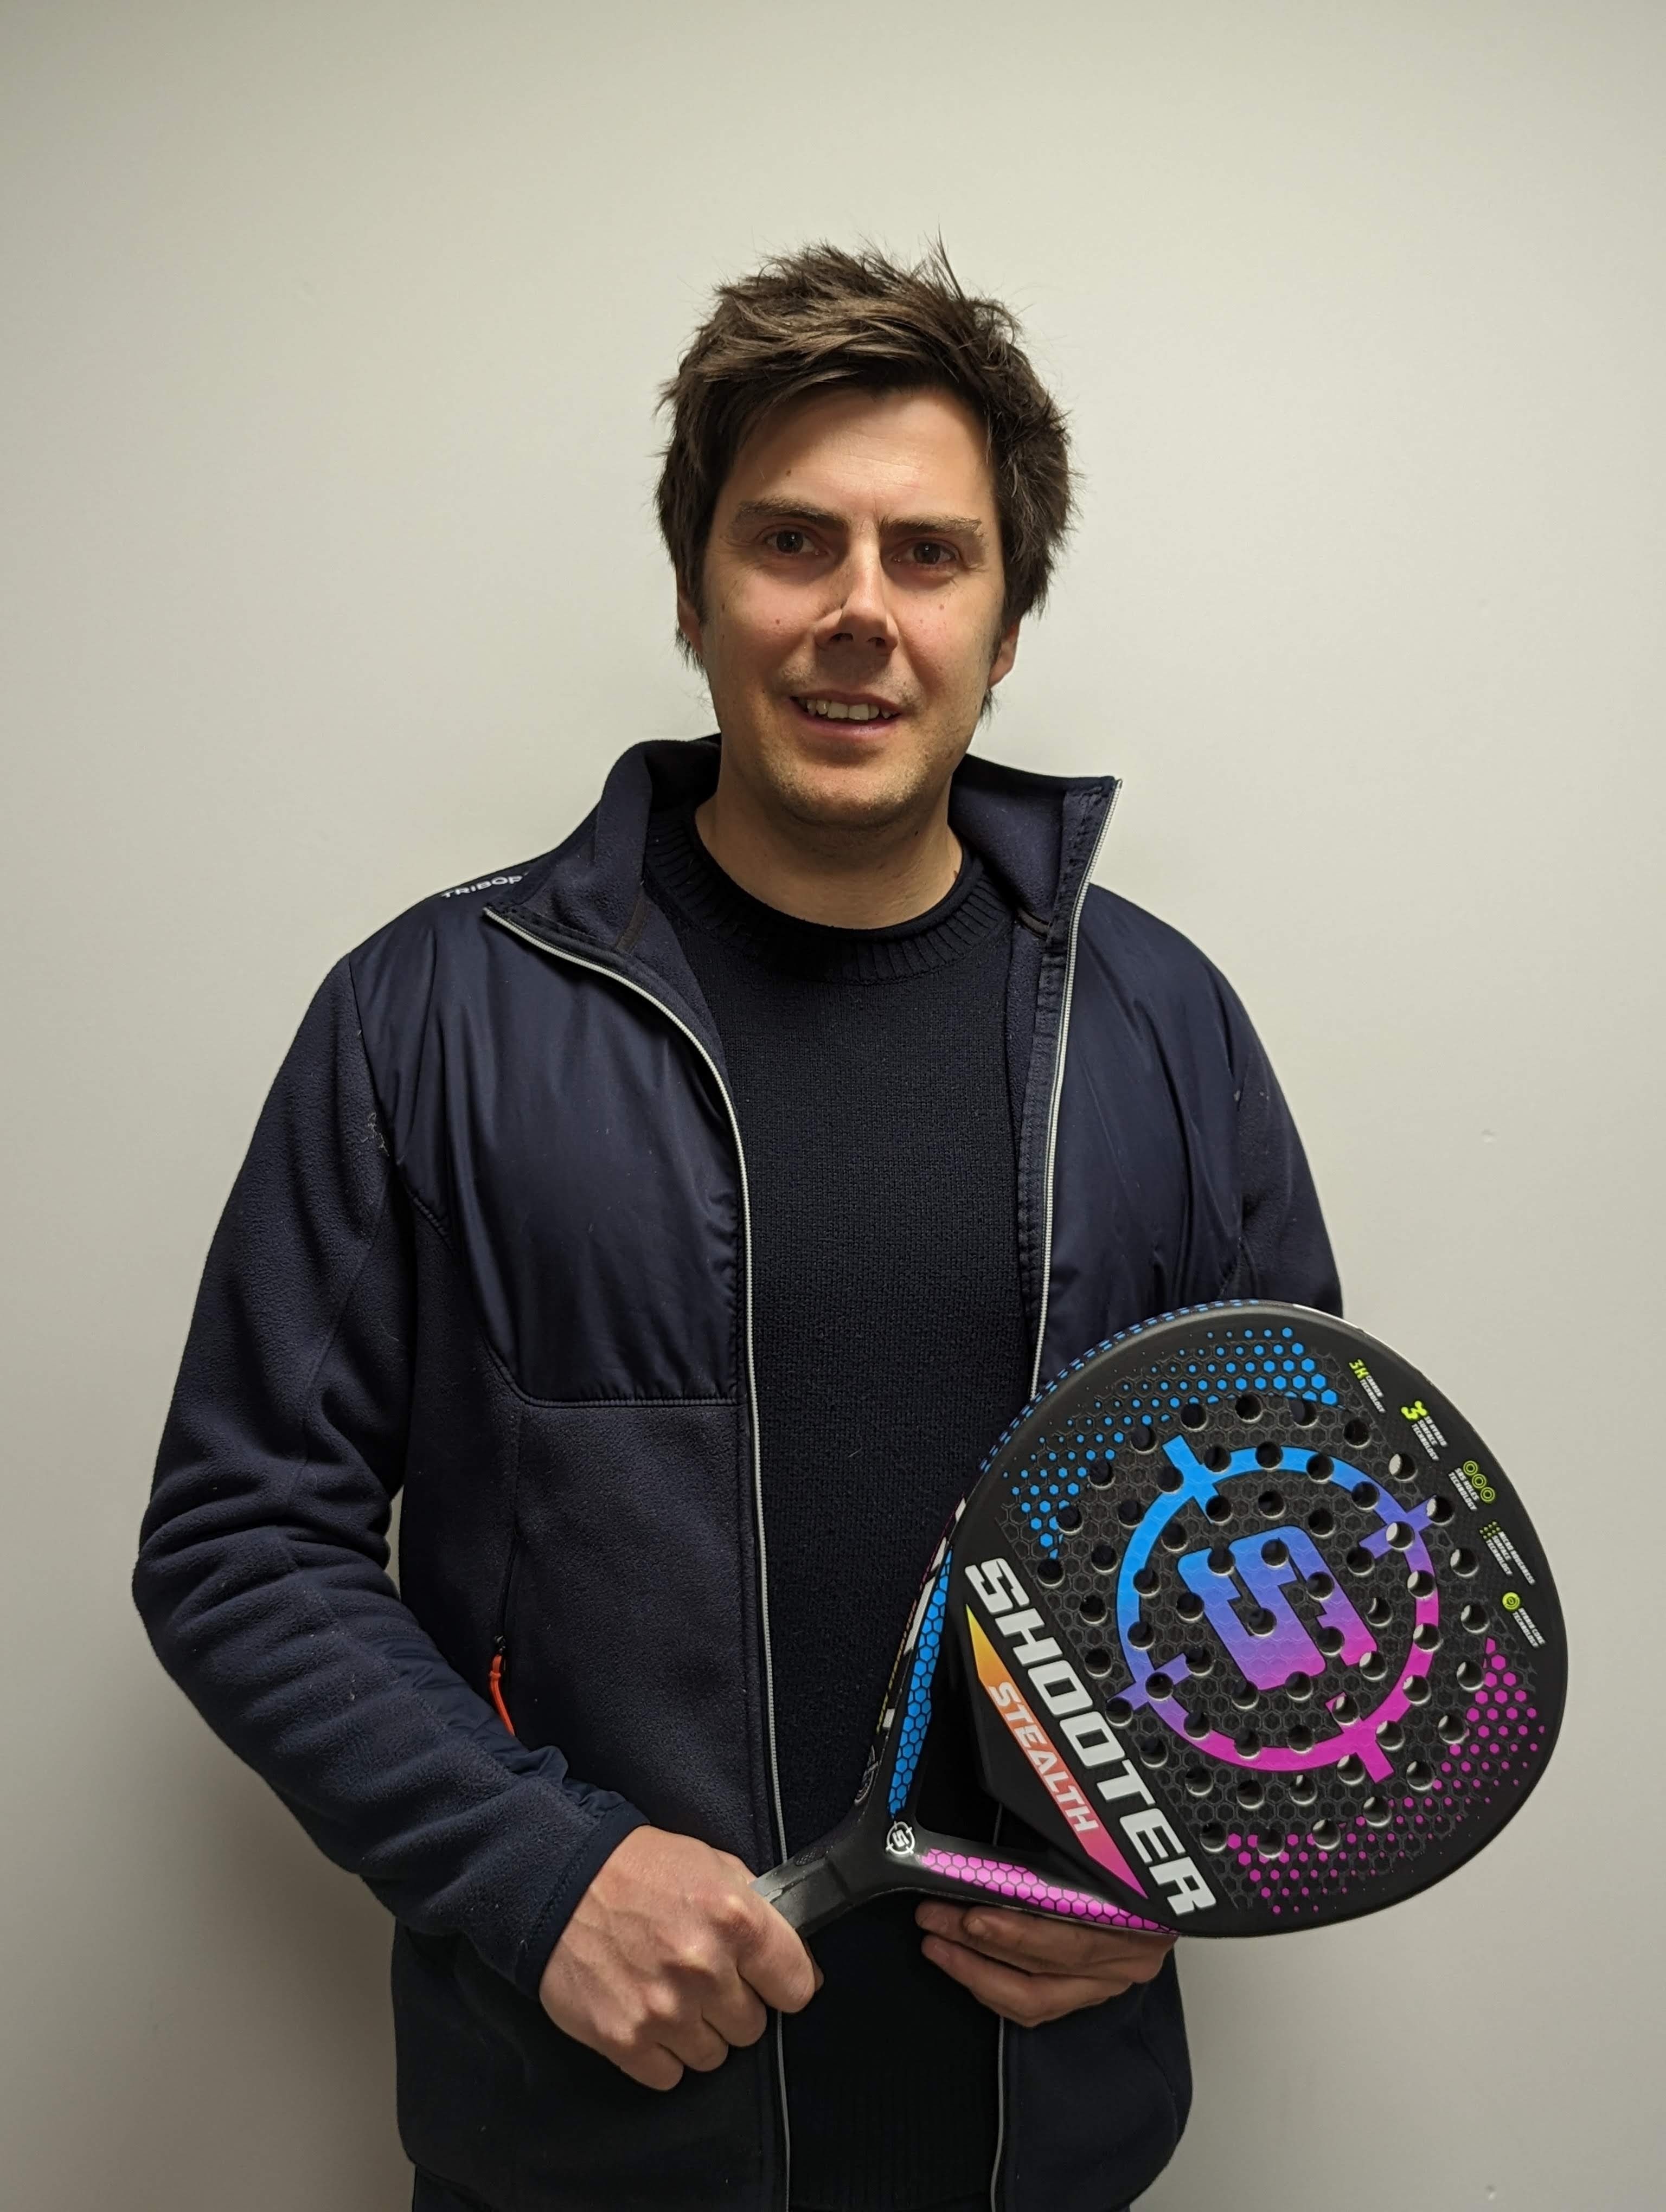 One of the founders showing two personalized racquets